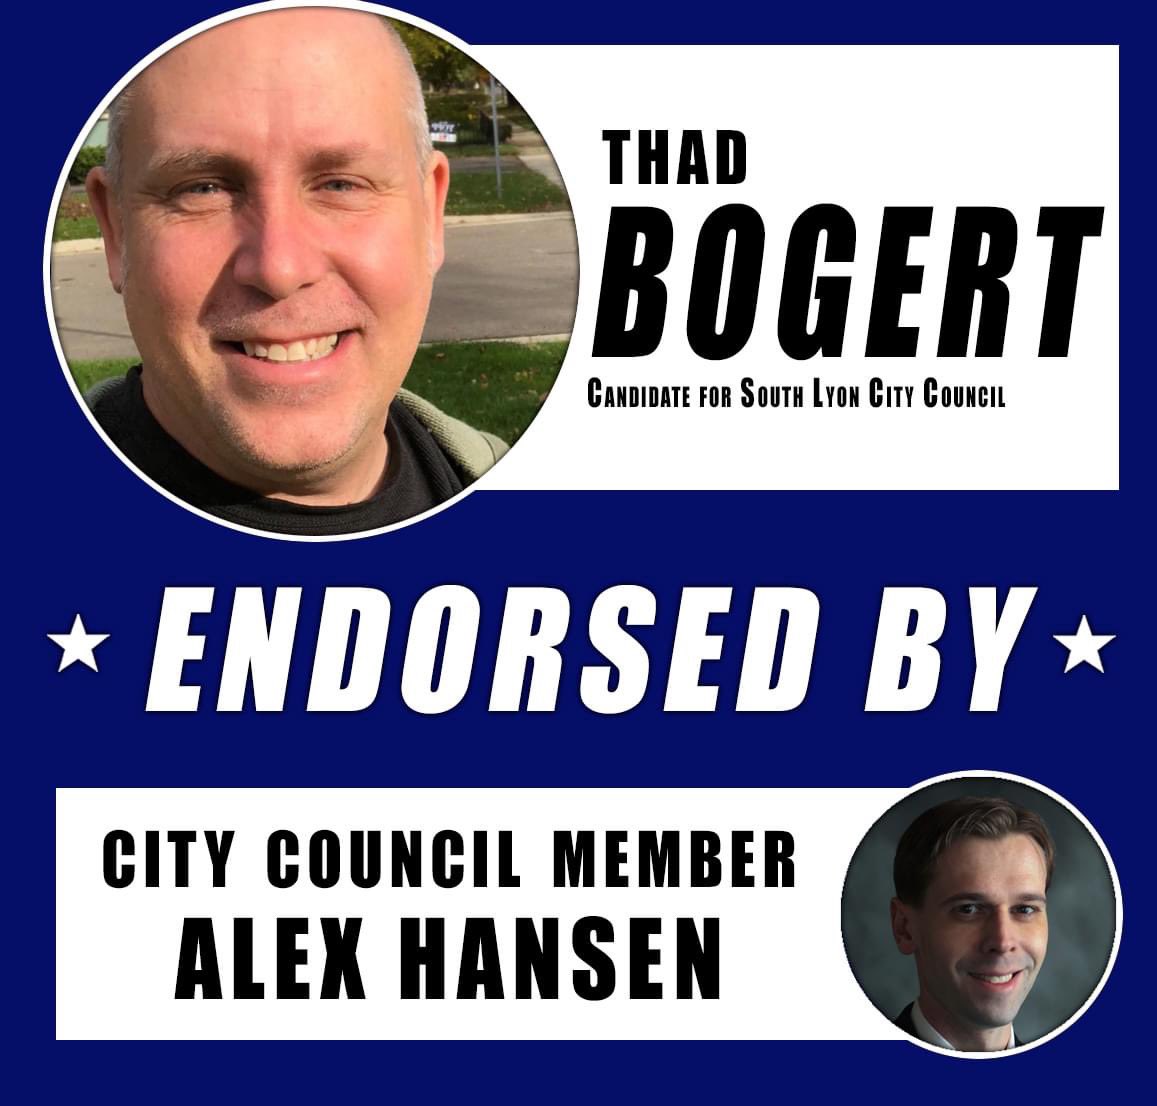 It is my pleasure to endorse Thad Bogert for South Lyon City Council. Thad is an energetic advocate for the South Lyon community & will be an exceptional addition to the Council! Join me in voting for him November 7th! #election2023 #elections #southlyon #CityCouncil #endorsement